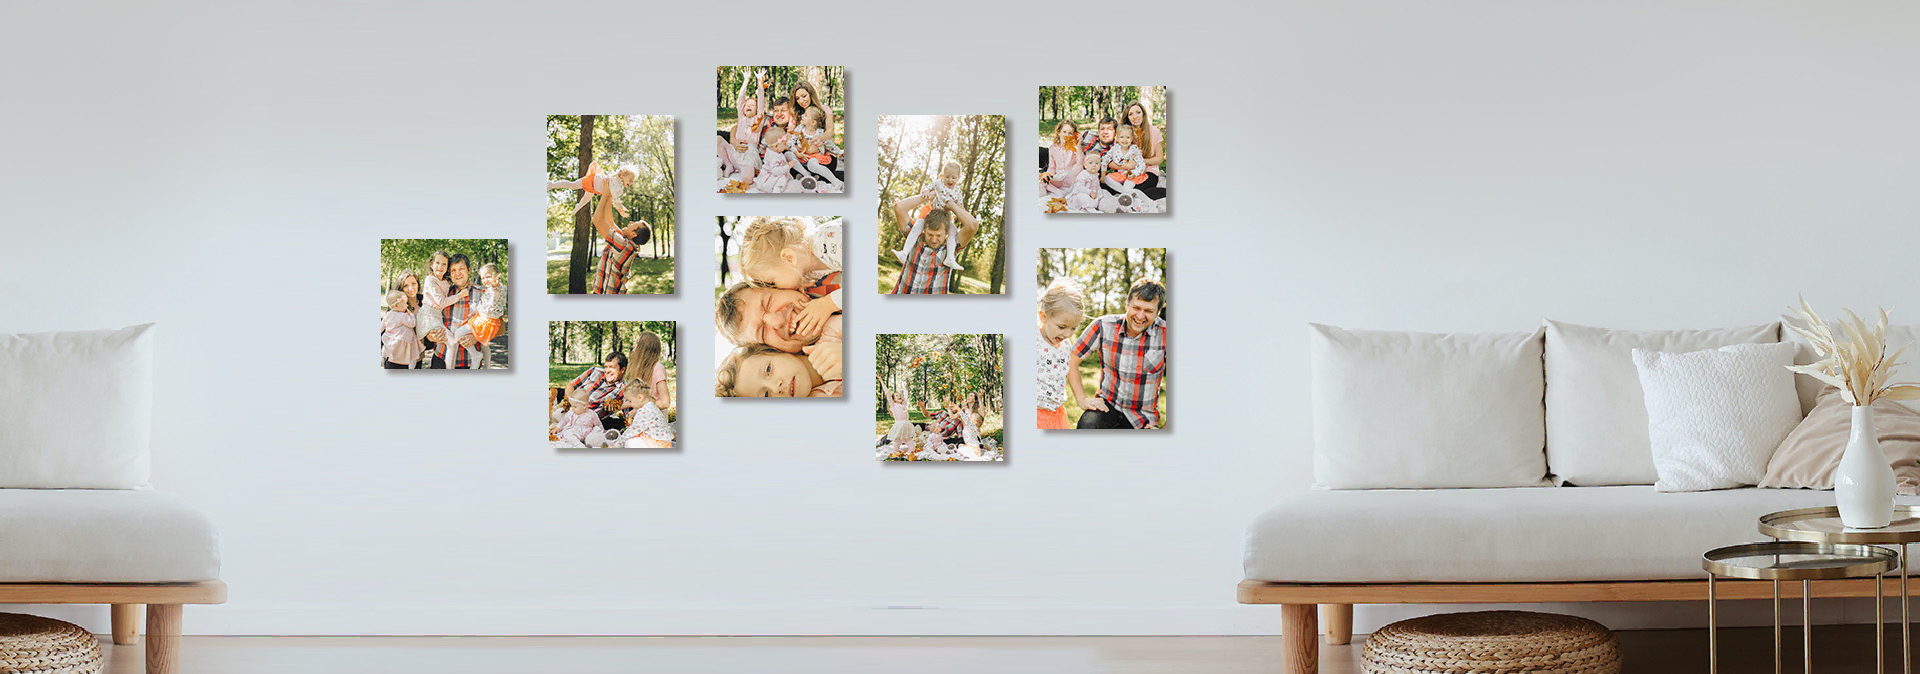 phototiles hung on the wall in upright and square position